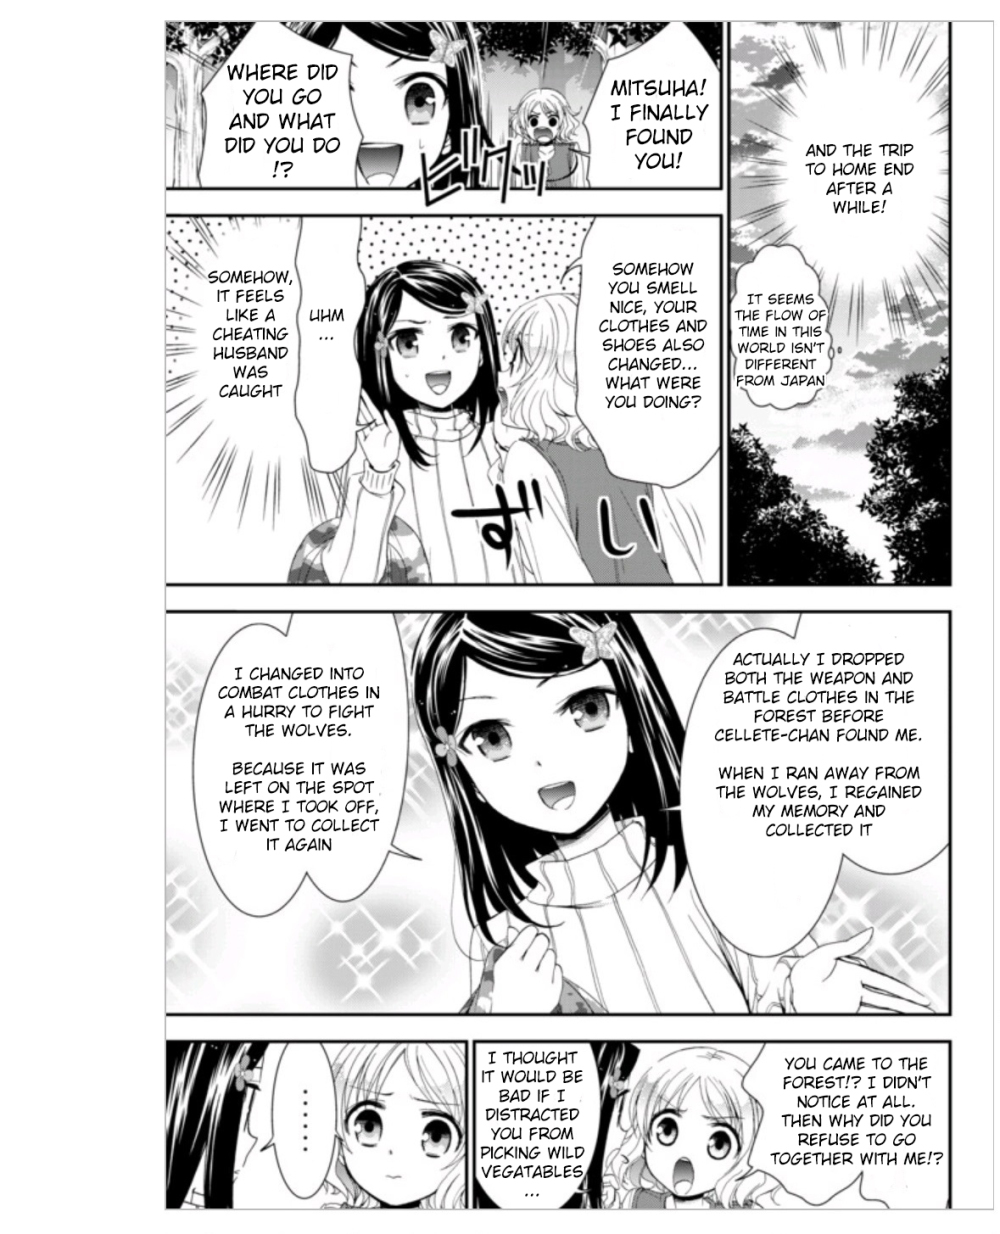 Saving 80,000 Gold Coins in the Different World for My Old Age Vol. 1 Ch. 4